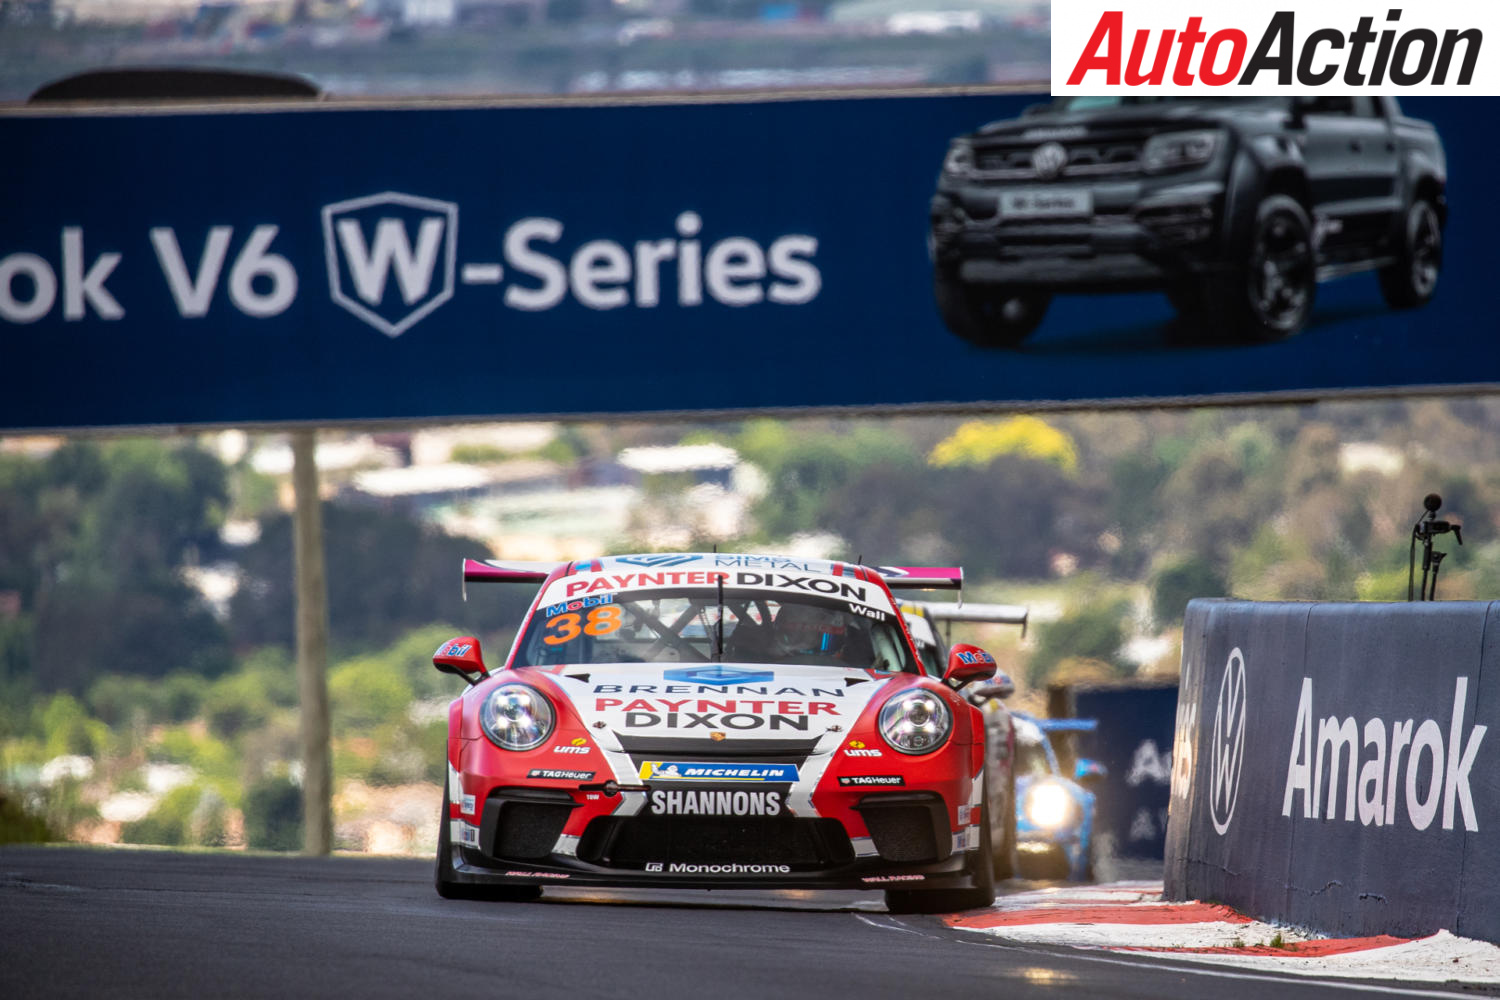 David Wall took the first Carrera Cup win - Image: InSyde Media